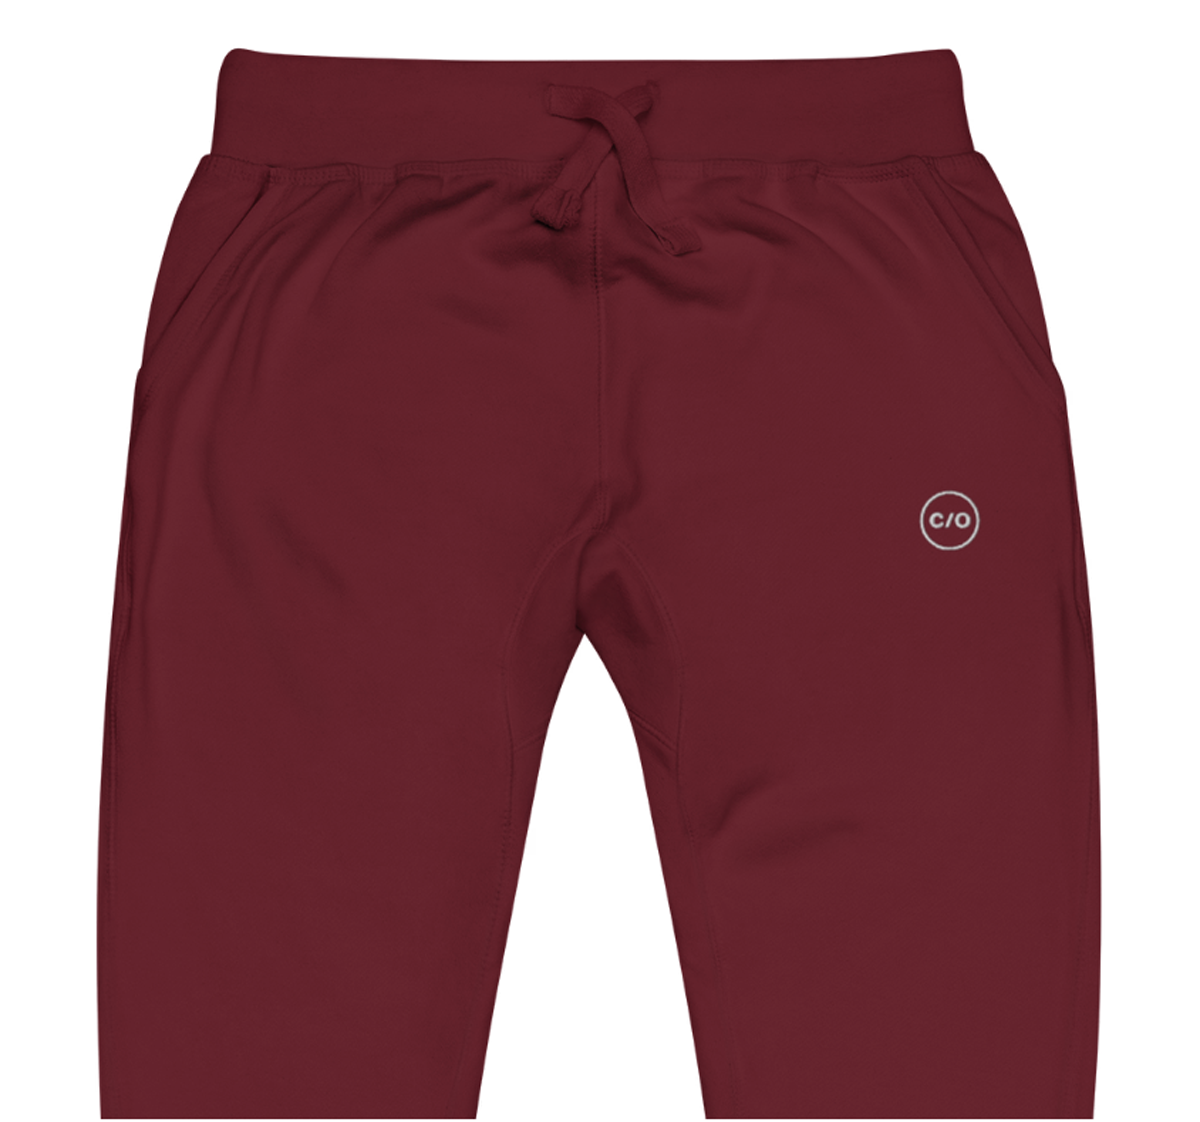 Neue Supply Co. Women's Performance Jogger in Red Maroon